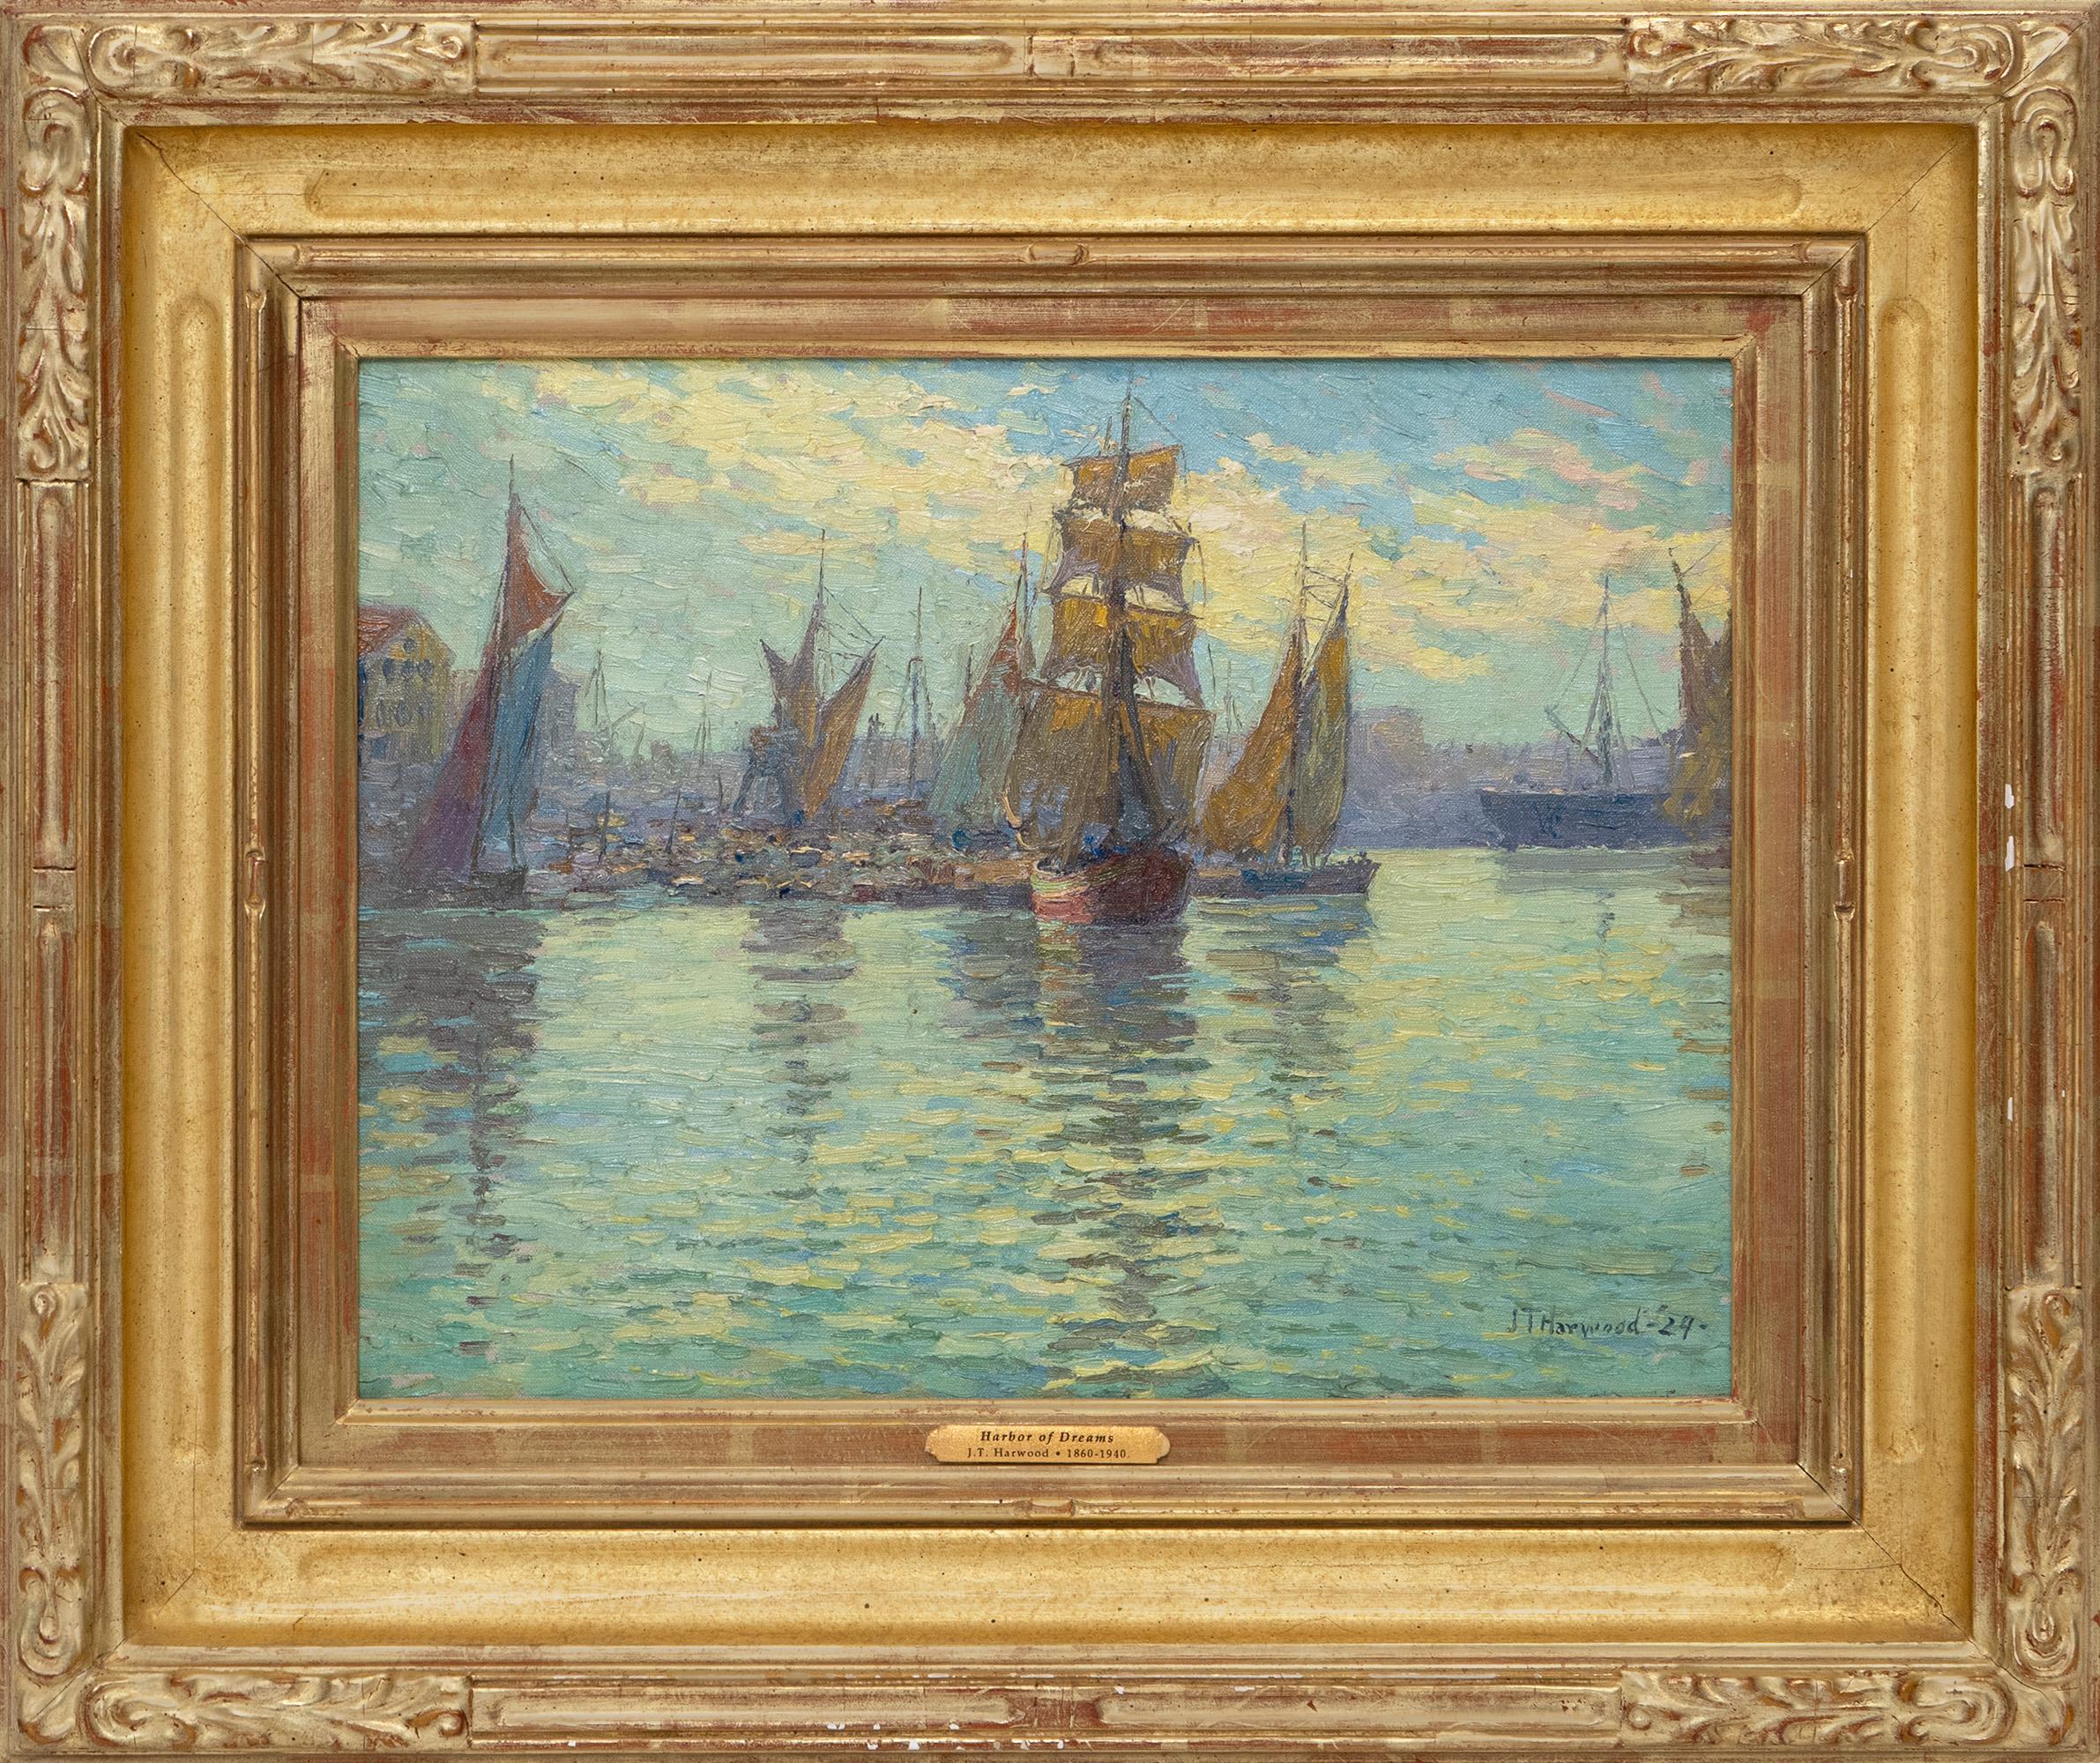 Harbor of Dreams - Brown Landscape Painting by James Taylor Harwood